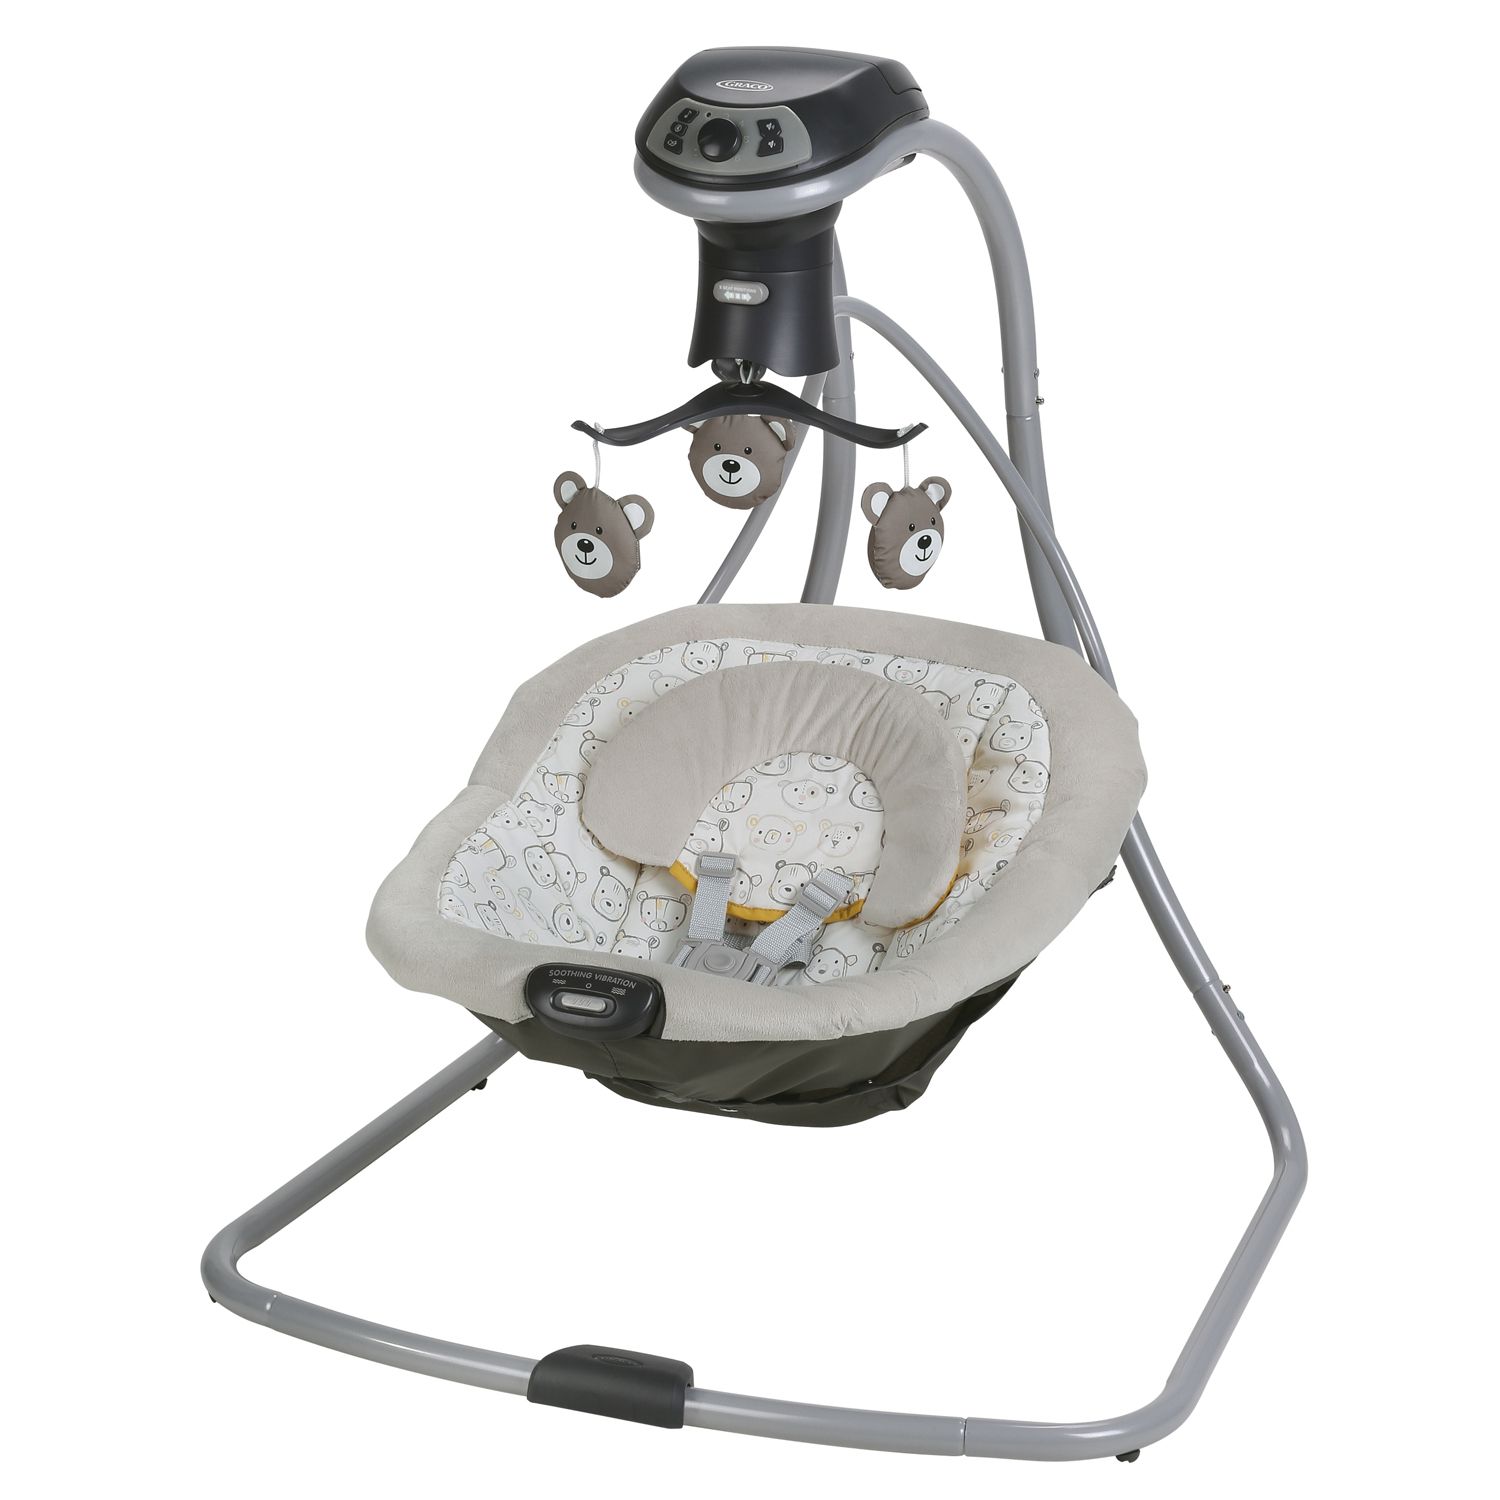 graco swing with tray